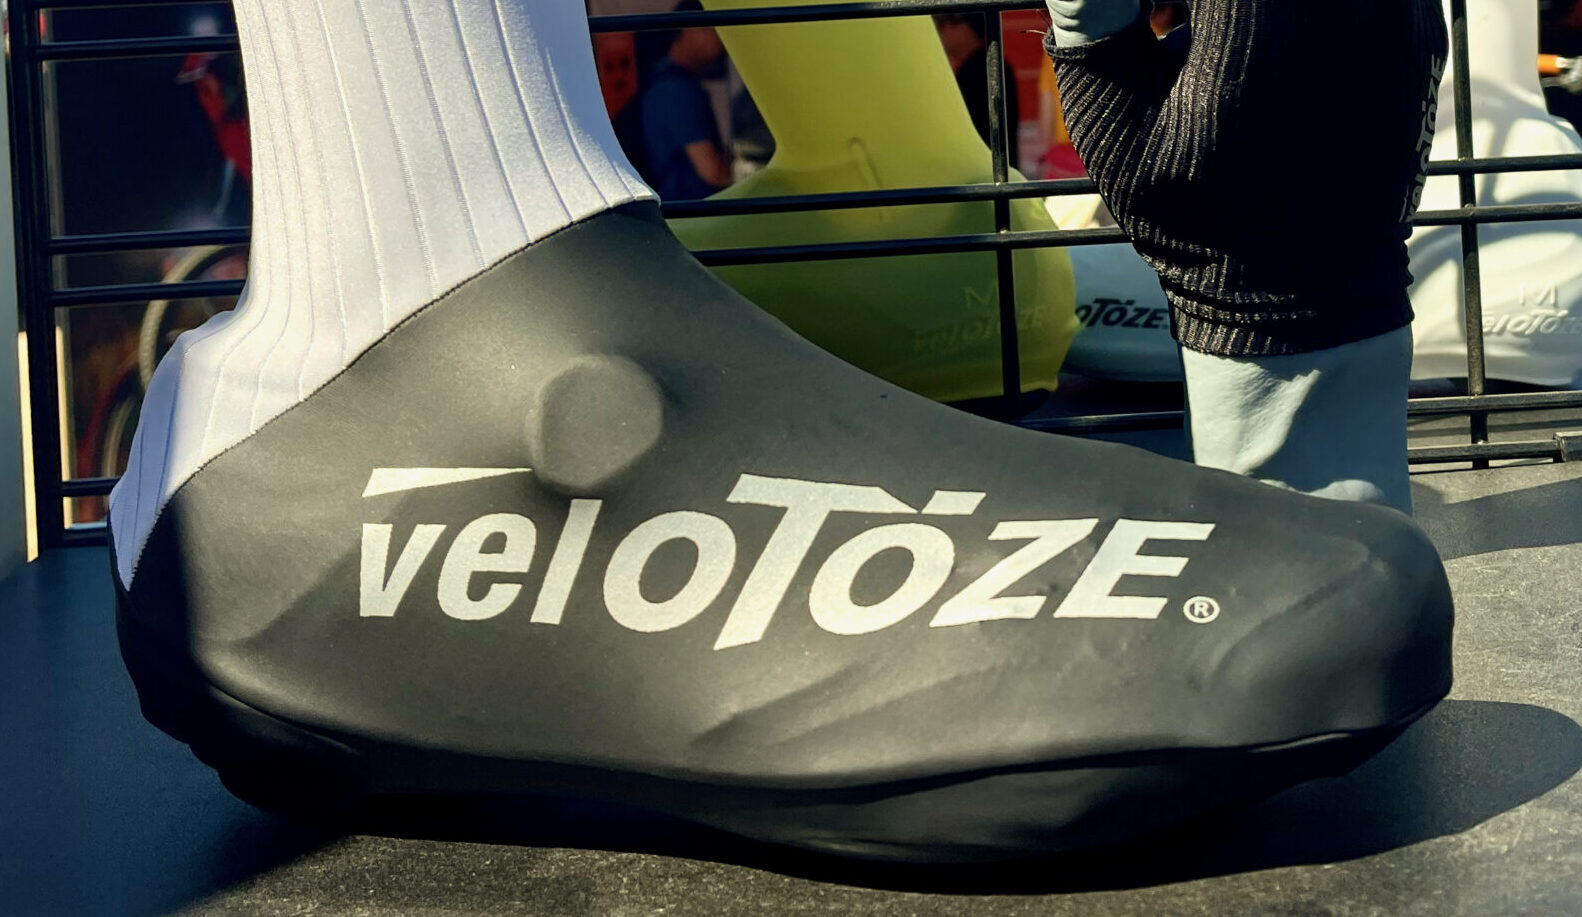 VeloToze Shows New Cycling Kits and Improved Aero Sock Designs